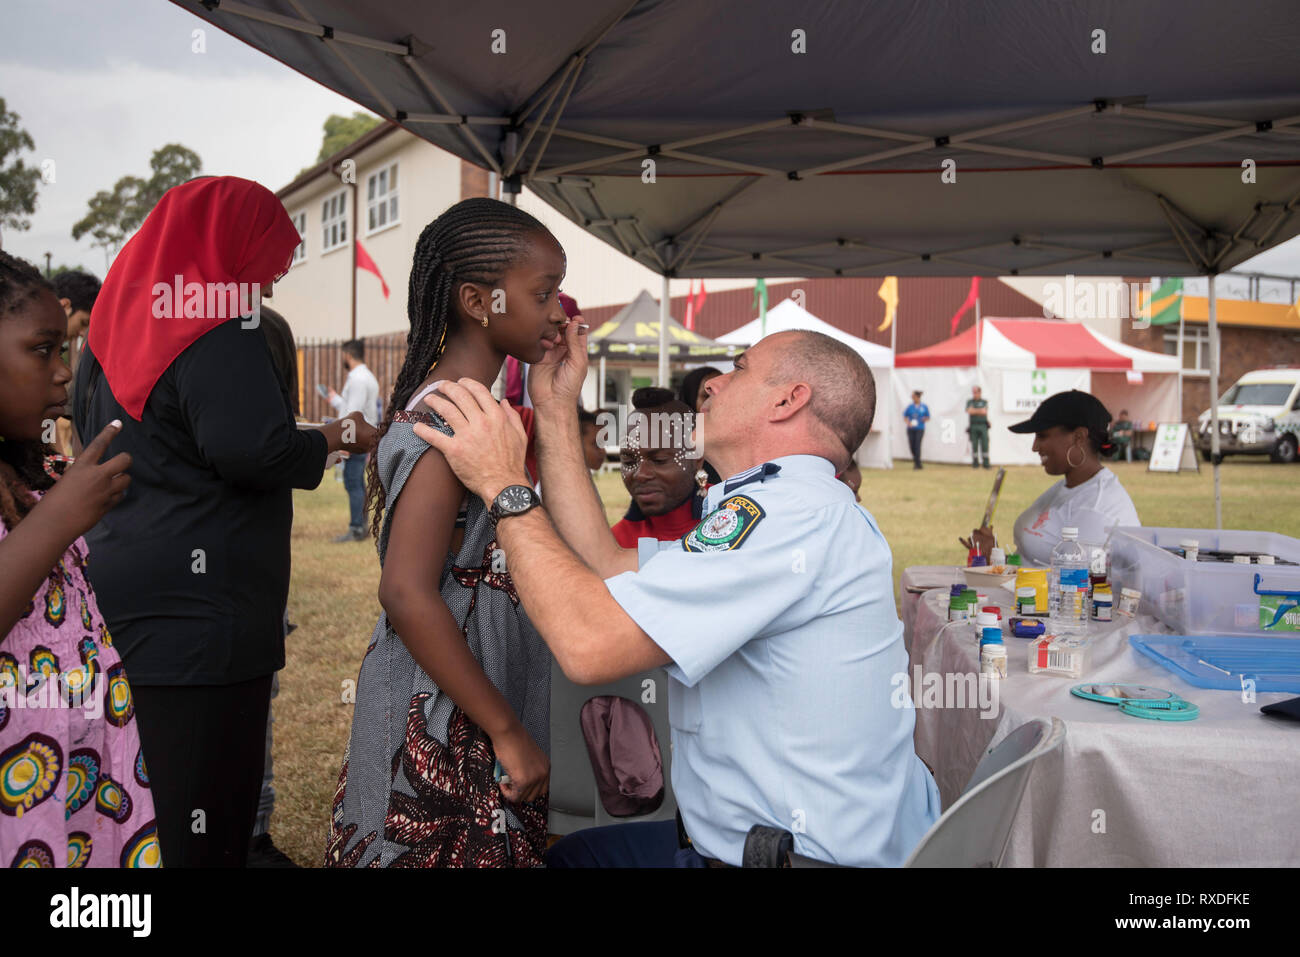 Sydney, Australia 9th, March 2019, NSW Police Sergent Robert Bourgault helps out with face painting at the Africultures Festival held in Wyatt Park, Lidcombe, Sydney. Despite the occasional shower of rain event goers were treated to music and entertainment, colourful market stalls and food from many of the represented nations. Contributor: Stephen Dwyer / Alamy Stock Photo Credit: Stephen Dwyer/Alamy Live News Stock Photo